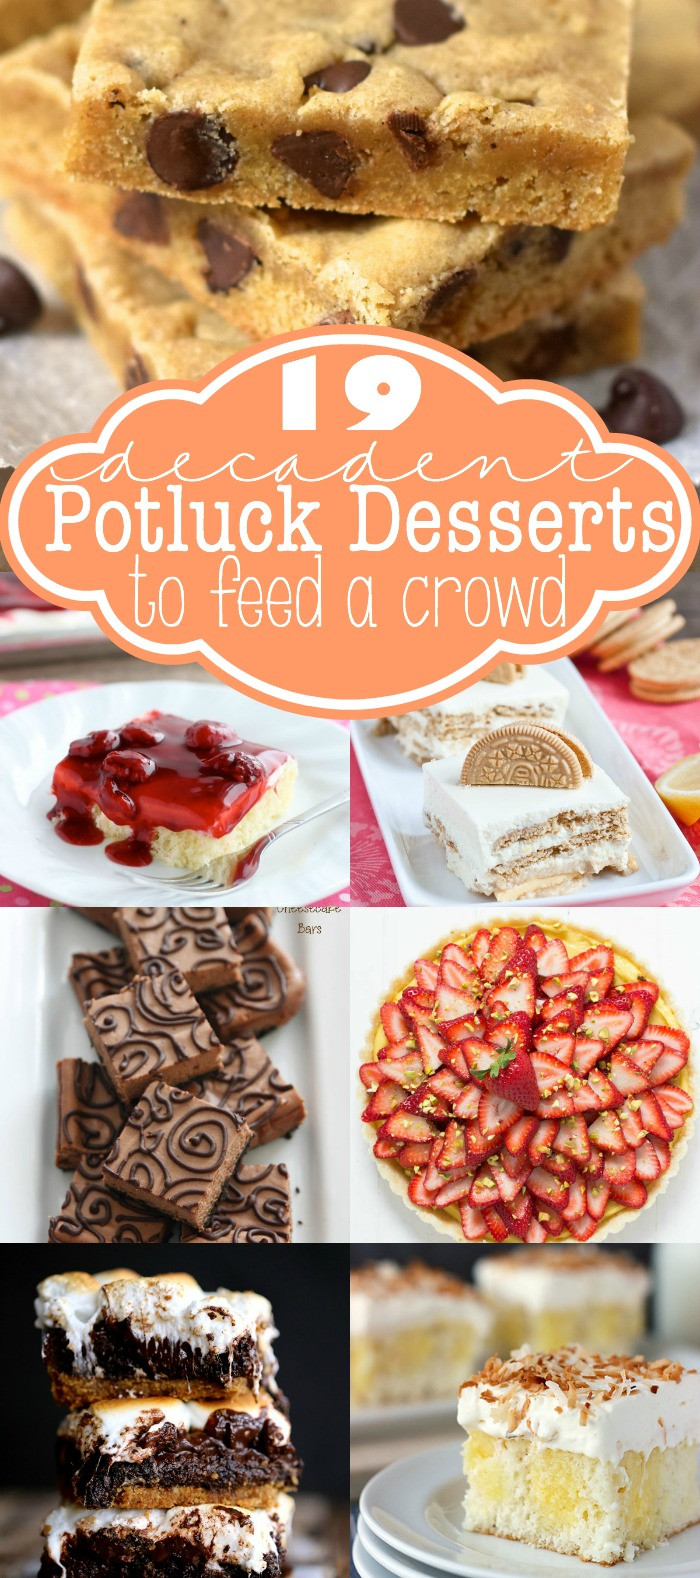 Cheap Desserts For A Crowd
 19 Decadent Potluck Desserts to Feed a Crowd